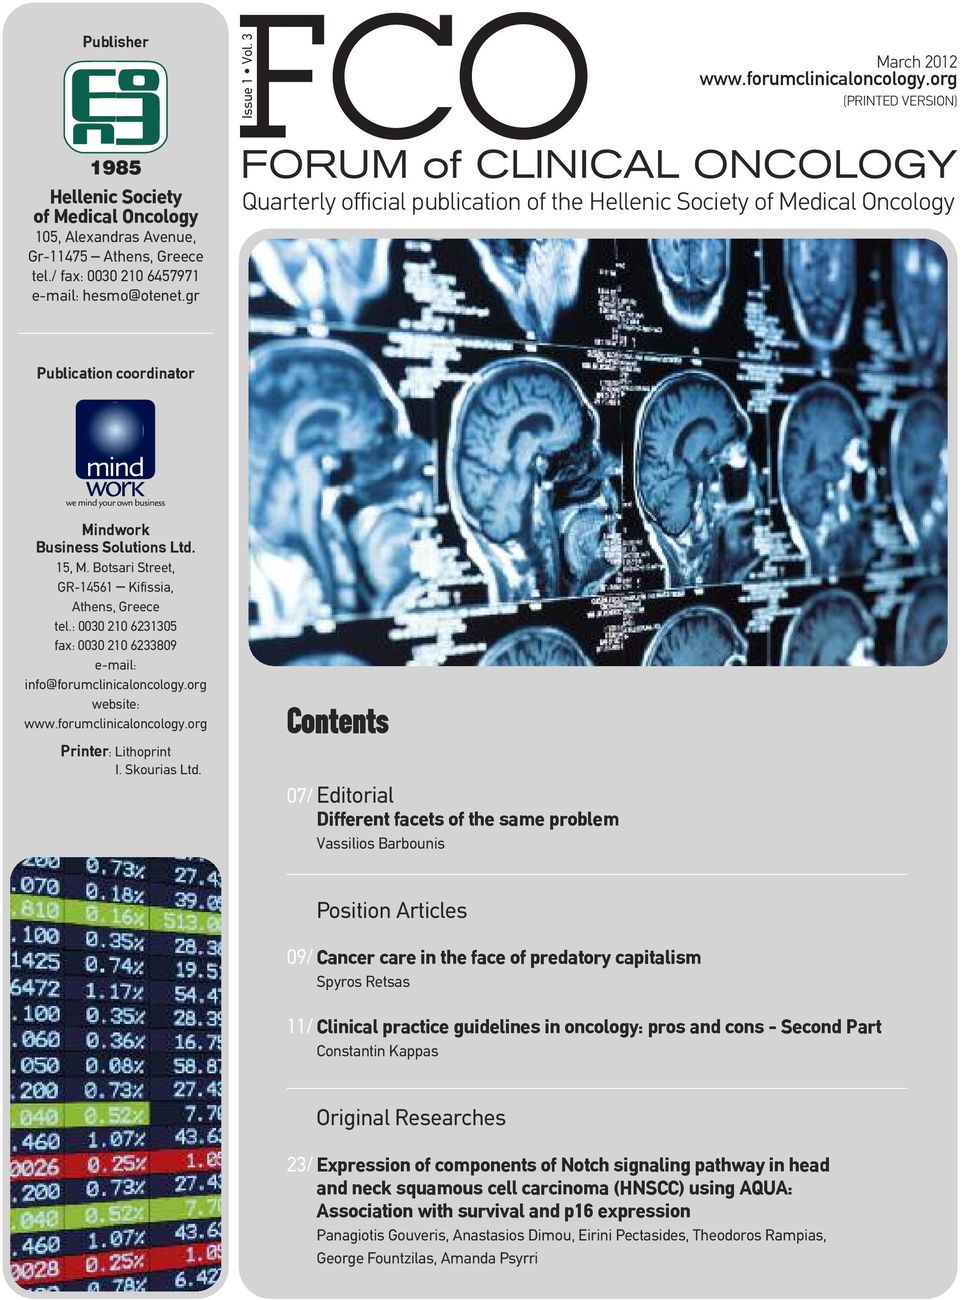 gr FORUM of CLINICAL ONCOLOGY Quarterly official publication of the Hellenic Society of Medical Oncology Publication coordinator Mindwork Business Solutions Ltd. 15, M.